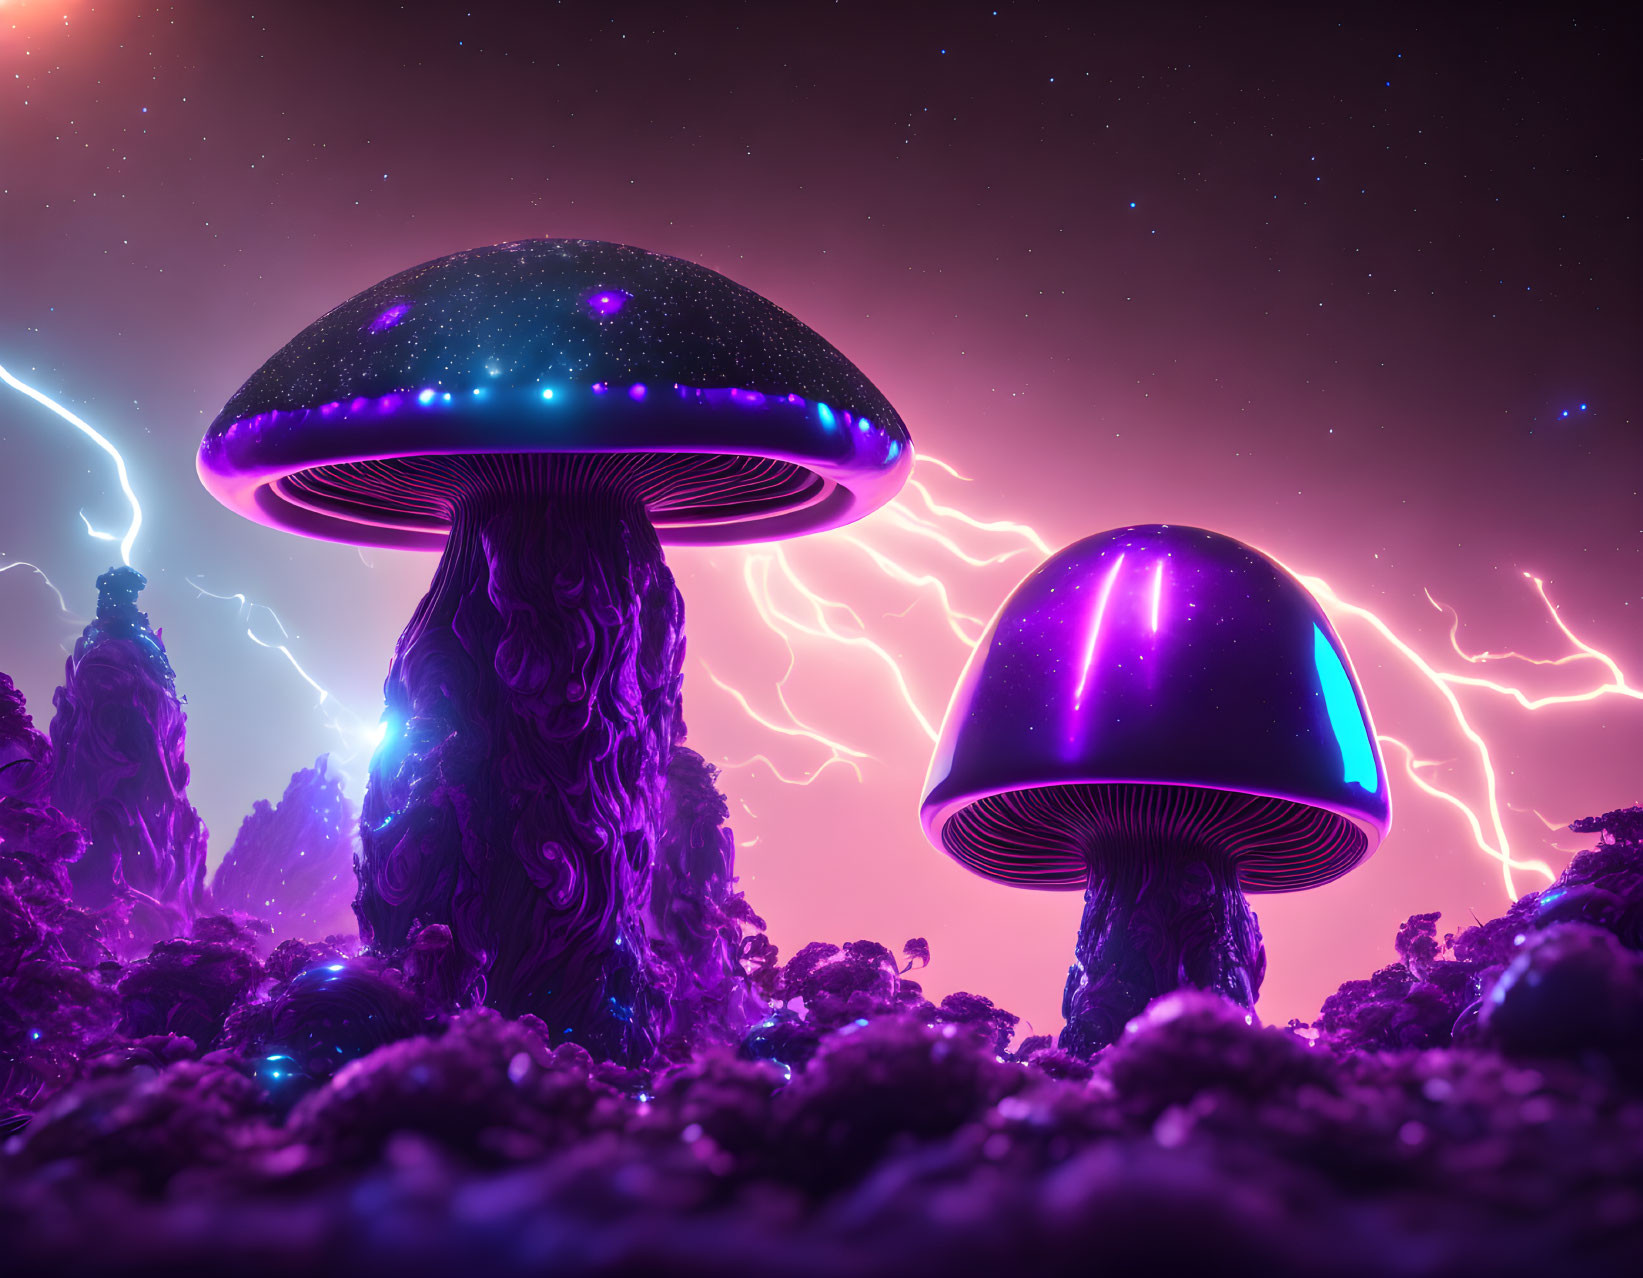 Fantasy Landscape with Giant Luminescent Mushrooms and Purple Lightning